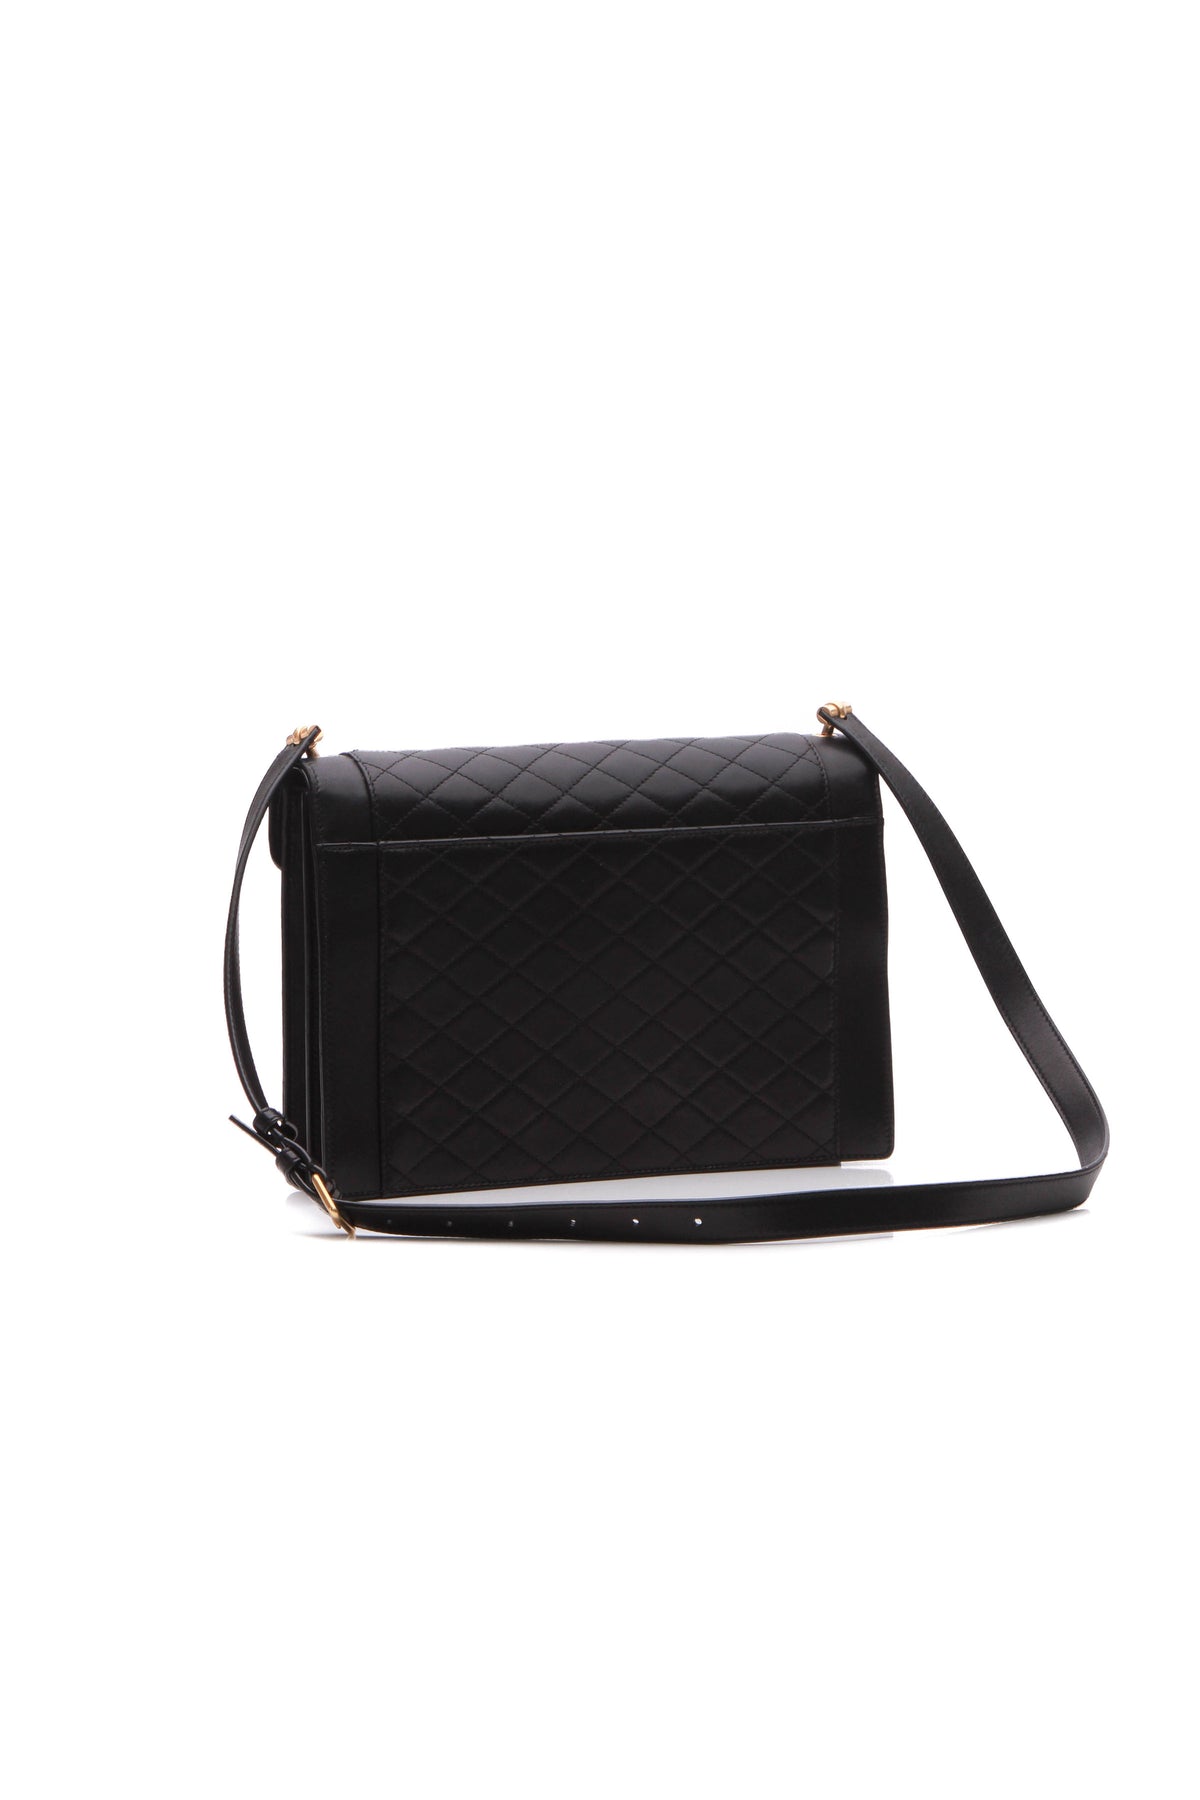 Saint Laurent Quilted Gaby Satchel Bag - Couture USA